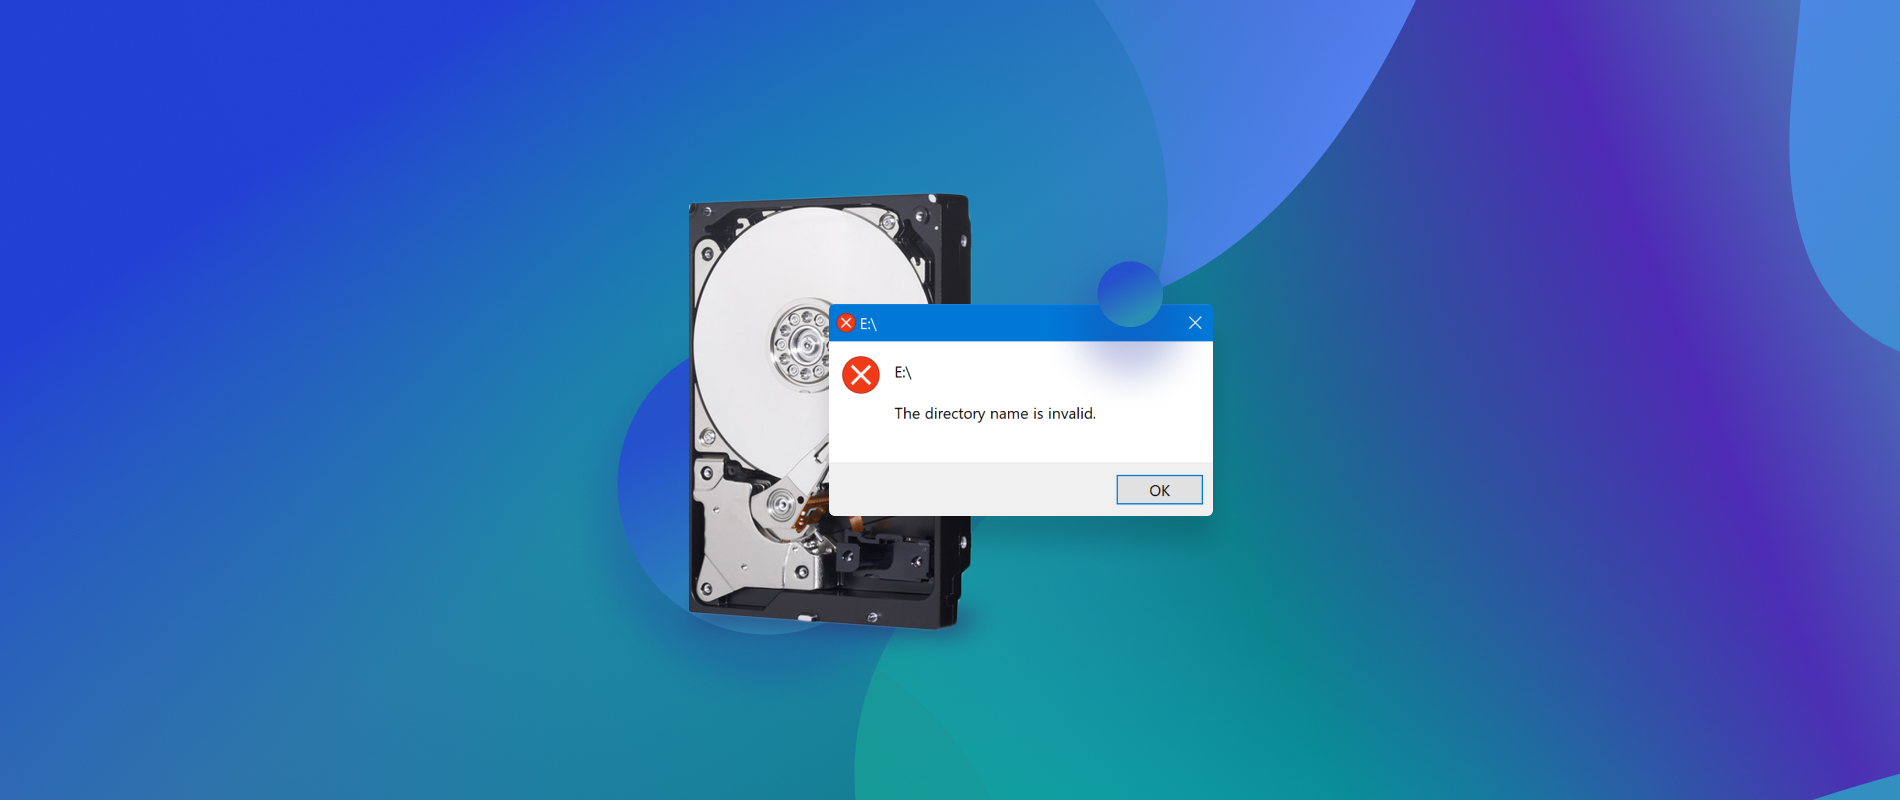 Ensure data integrity: Safely removing an external hard drive helps prevent data corruption and ensures the integrity of your files.
Close any open files or applications that may be using the external drive. This will ensure all data is written to the drive before ejecting it.